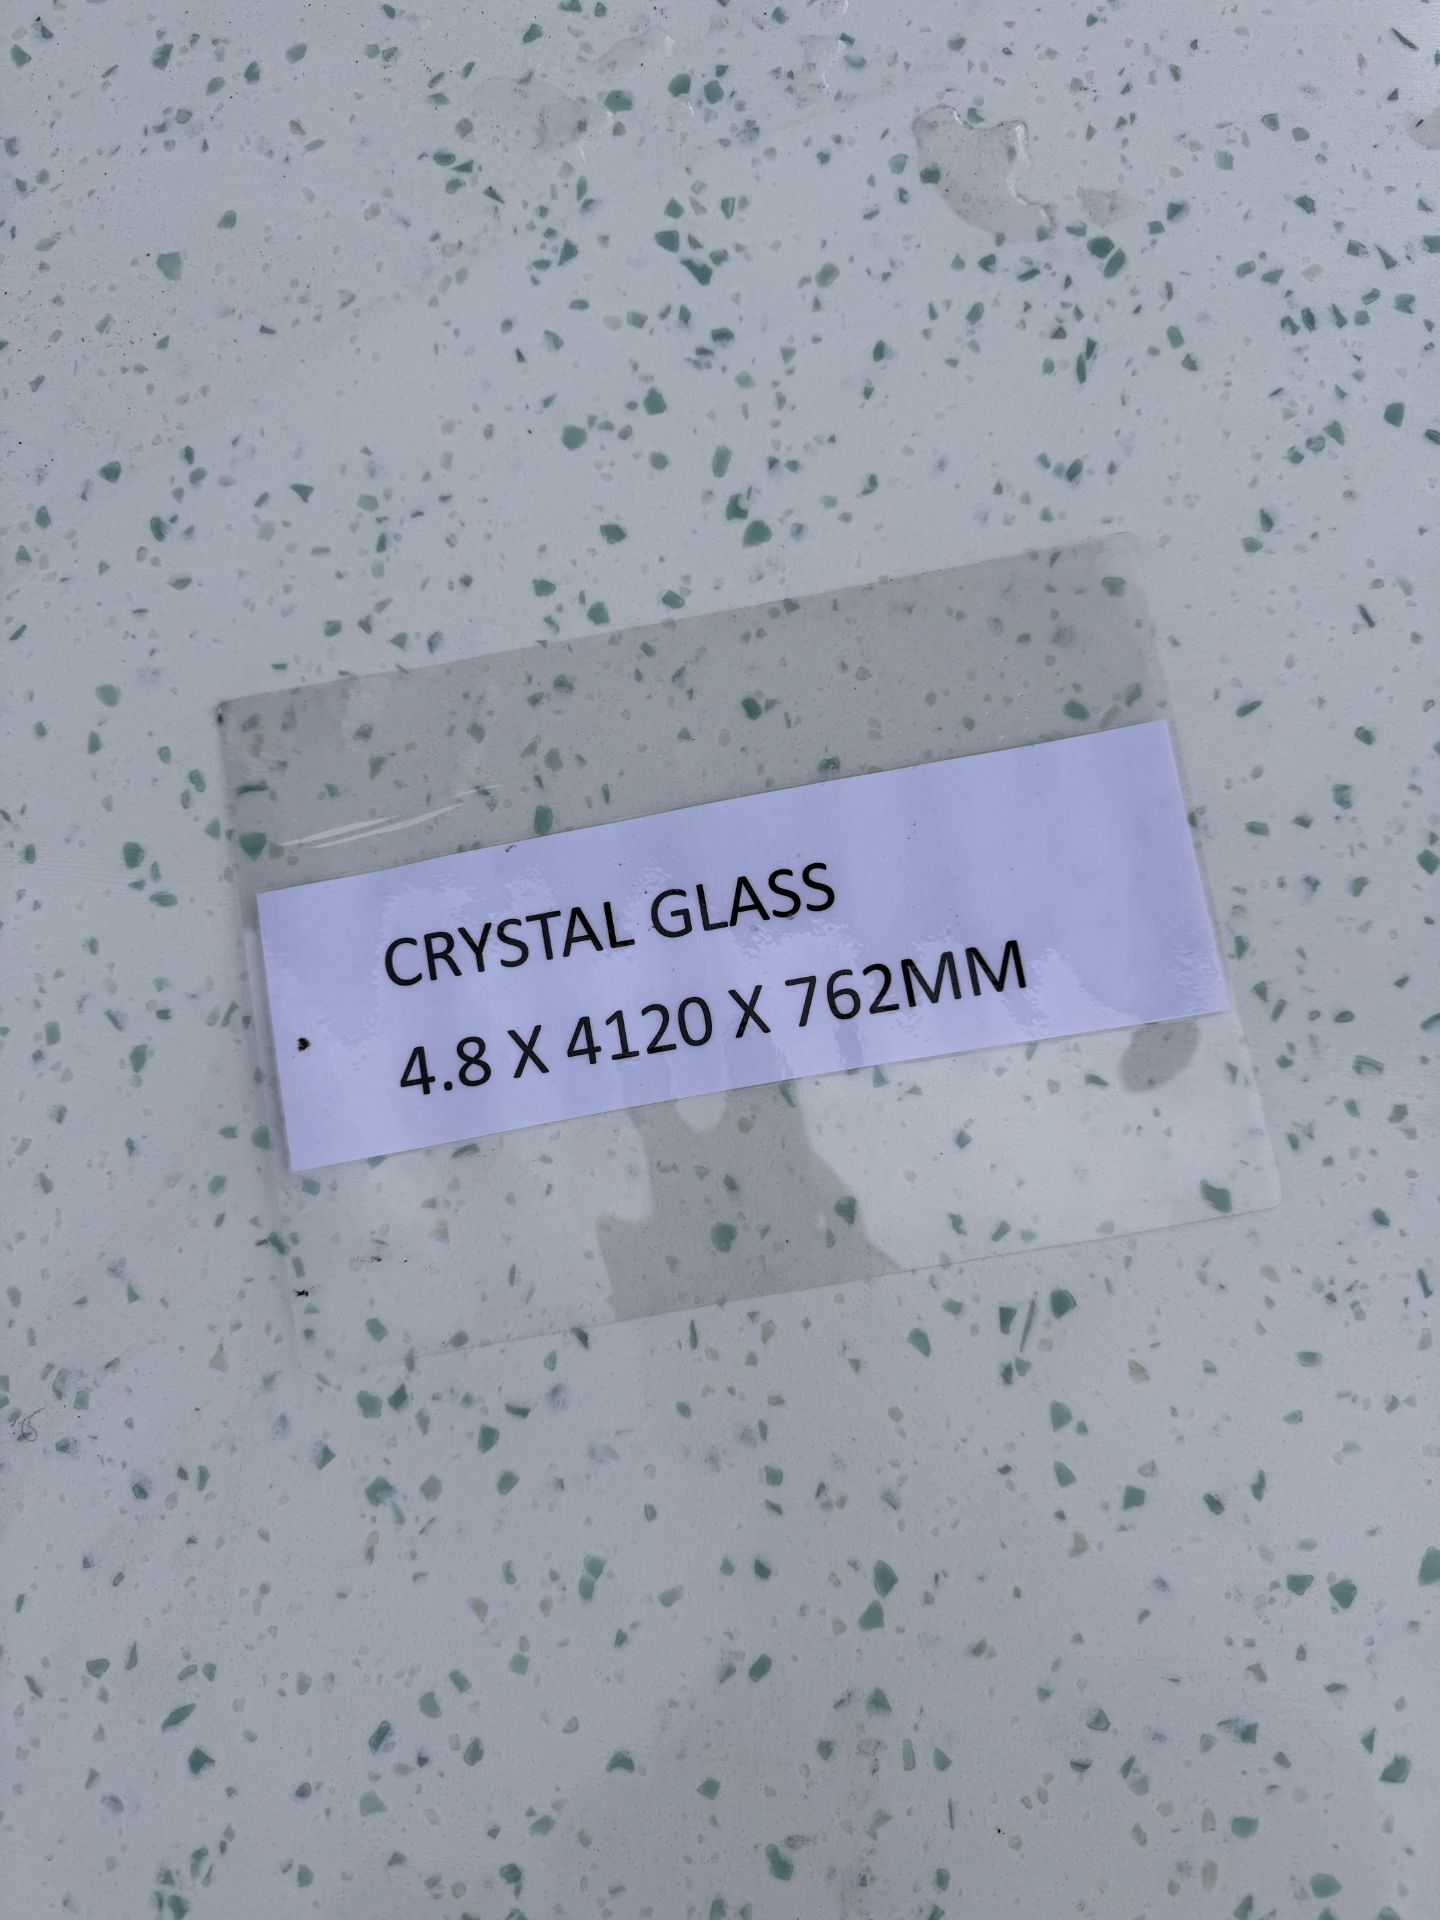 X6 Decorative Acrylic Wall Panel Sheets - Colour: Crystal Glass - Size: 4120 x 762 x 4.8mm - Image 2 of 2